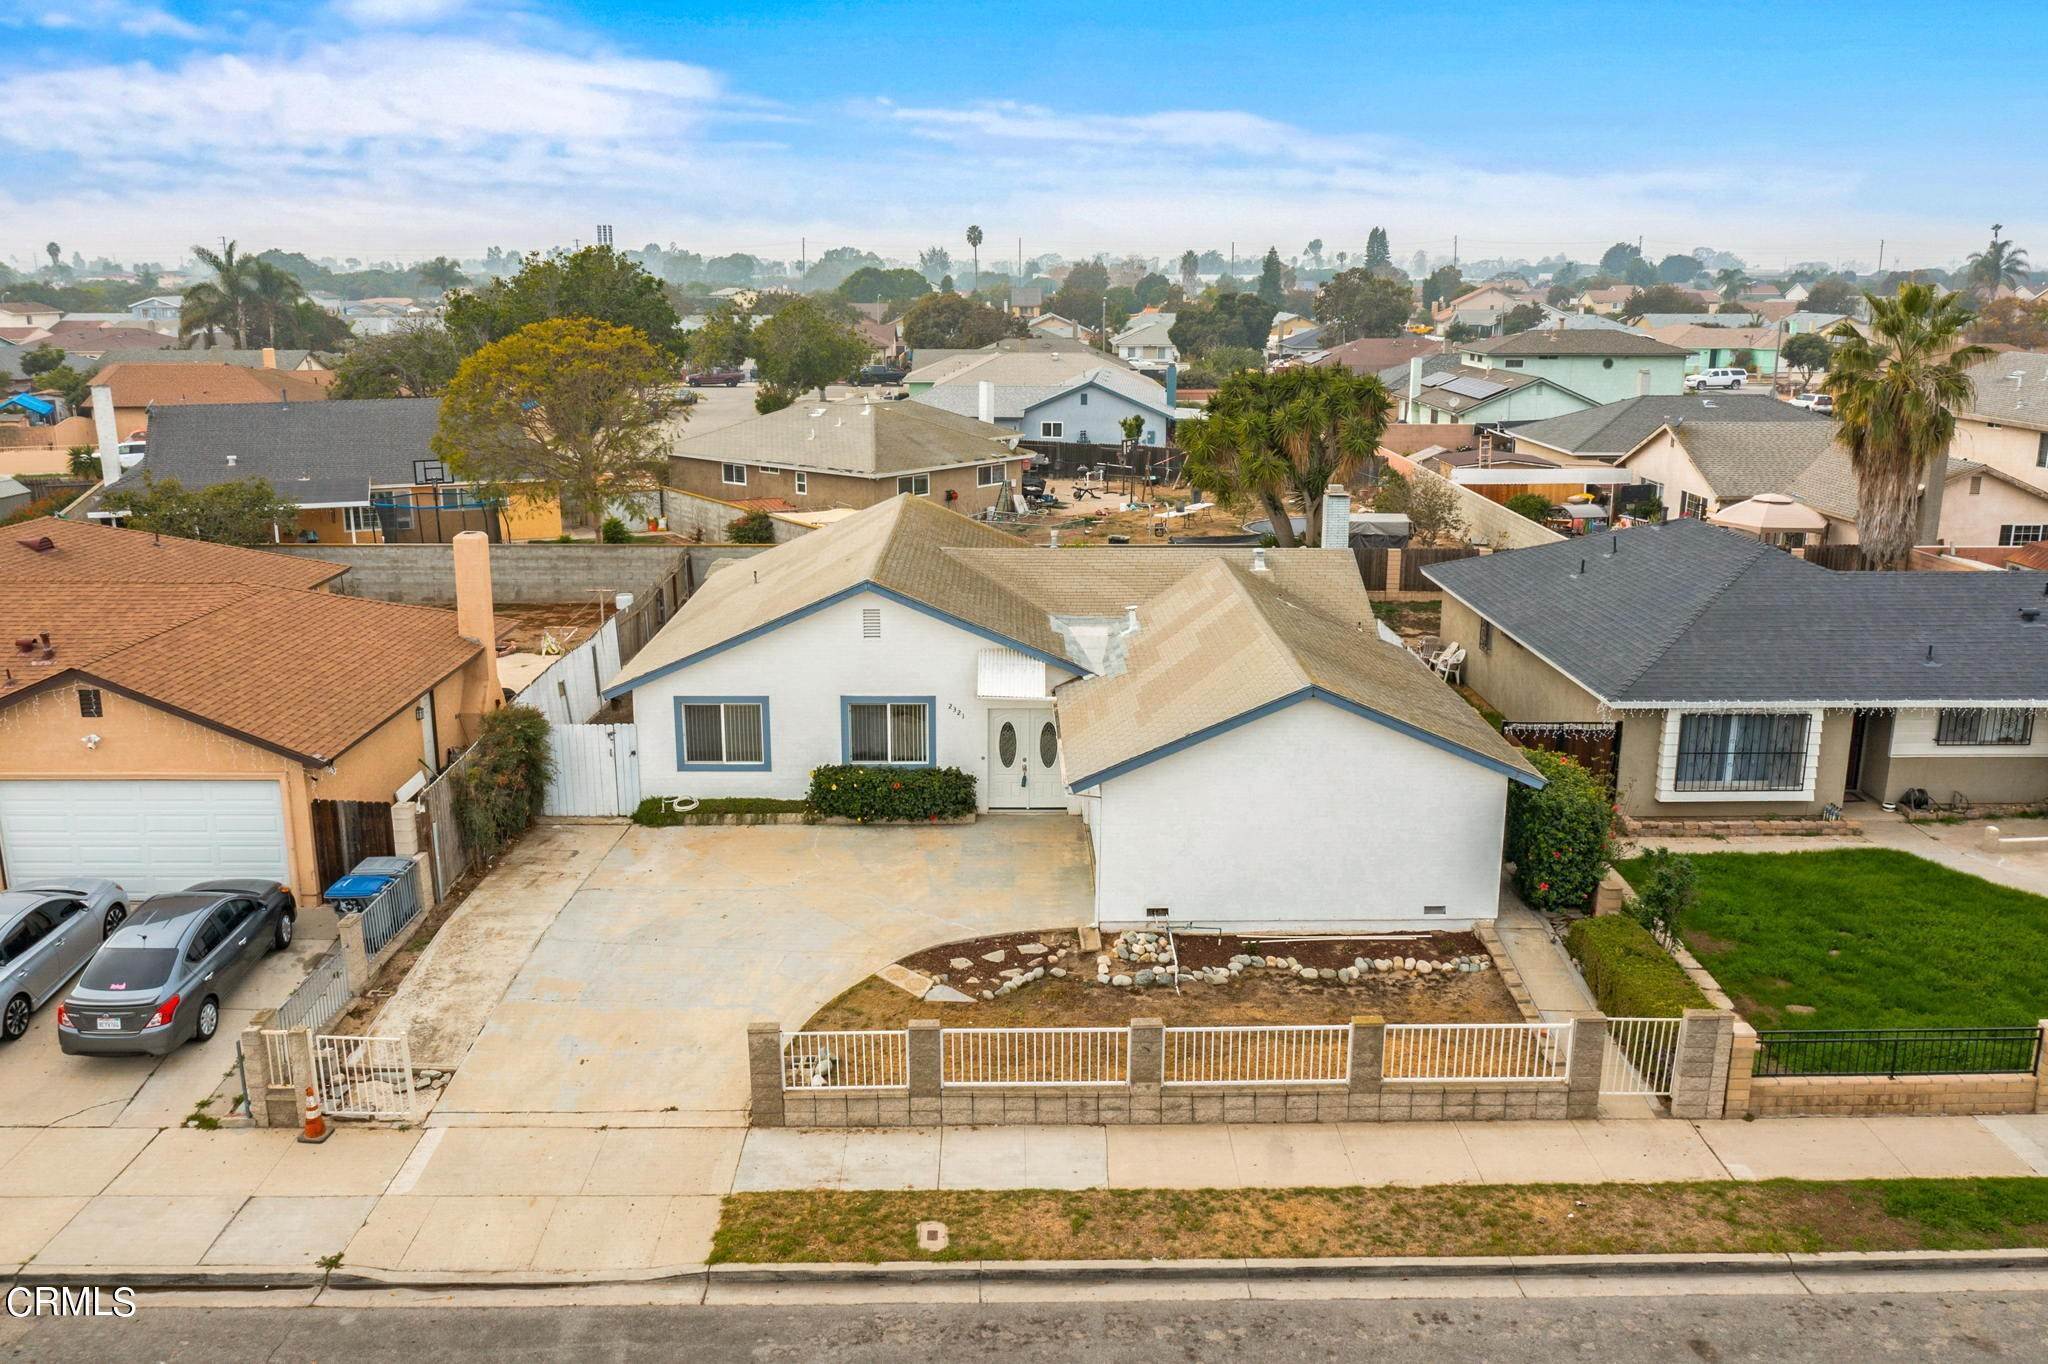 36. Single Family Homes for Sale at 2321 Dupont Street Oxnard, California 93033 United States